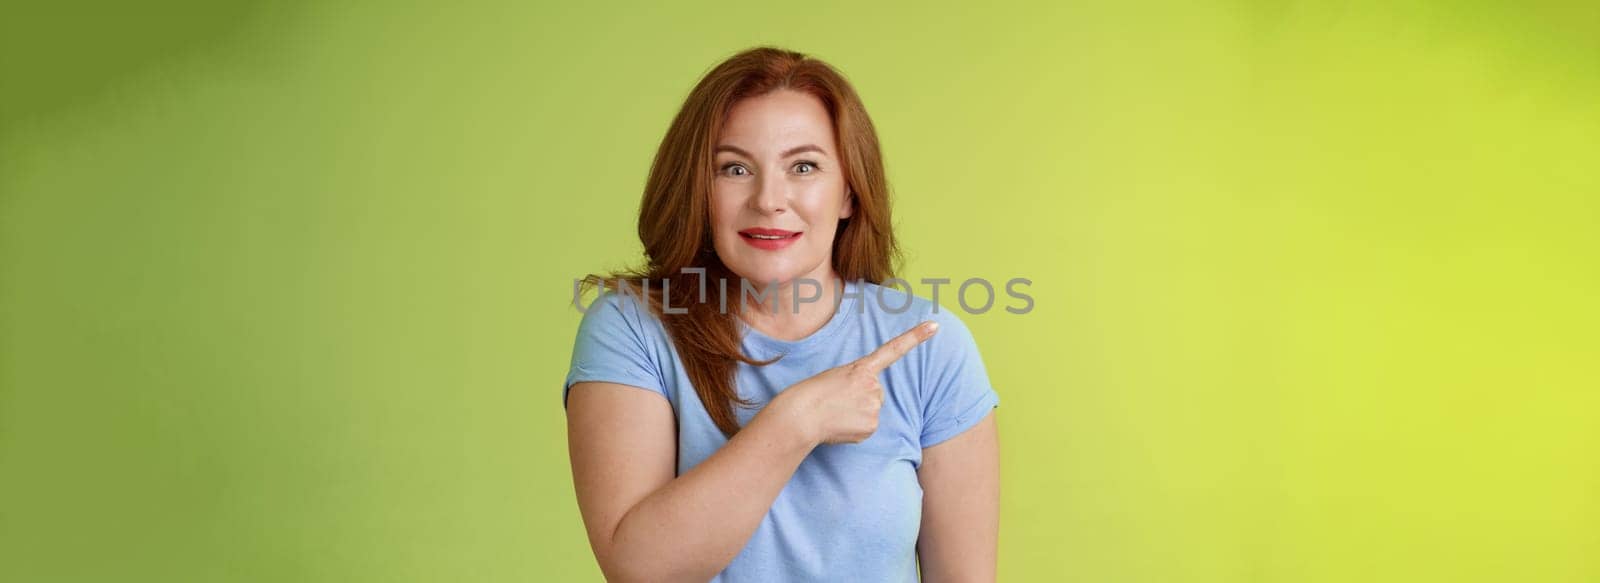 Surprised excited middle-aged wondered redhead woman pointing left amused standing thrilled joyful green background look camera curious interested cannot wait check-out great promo.